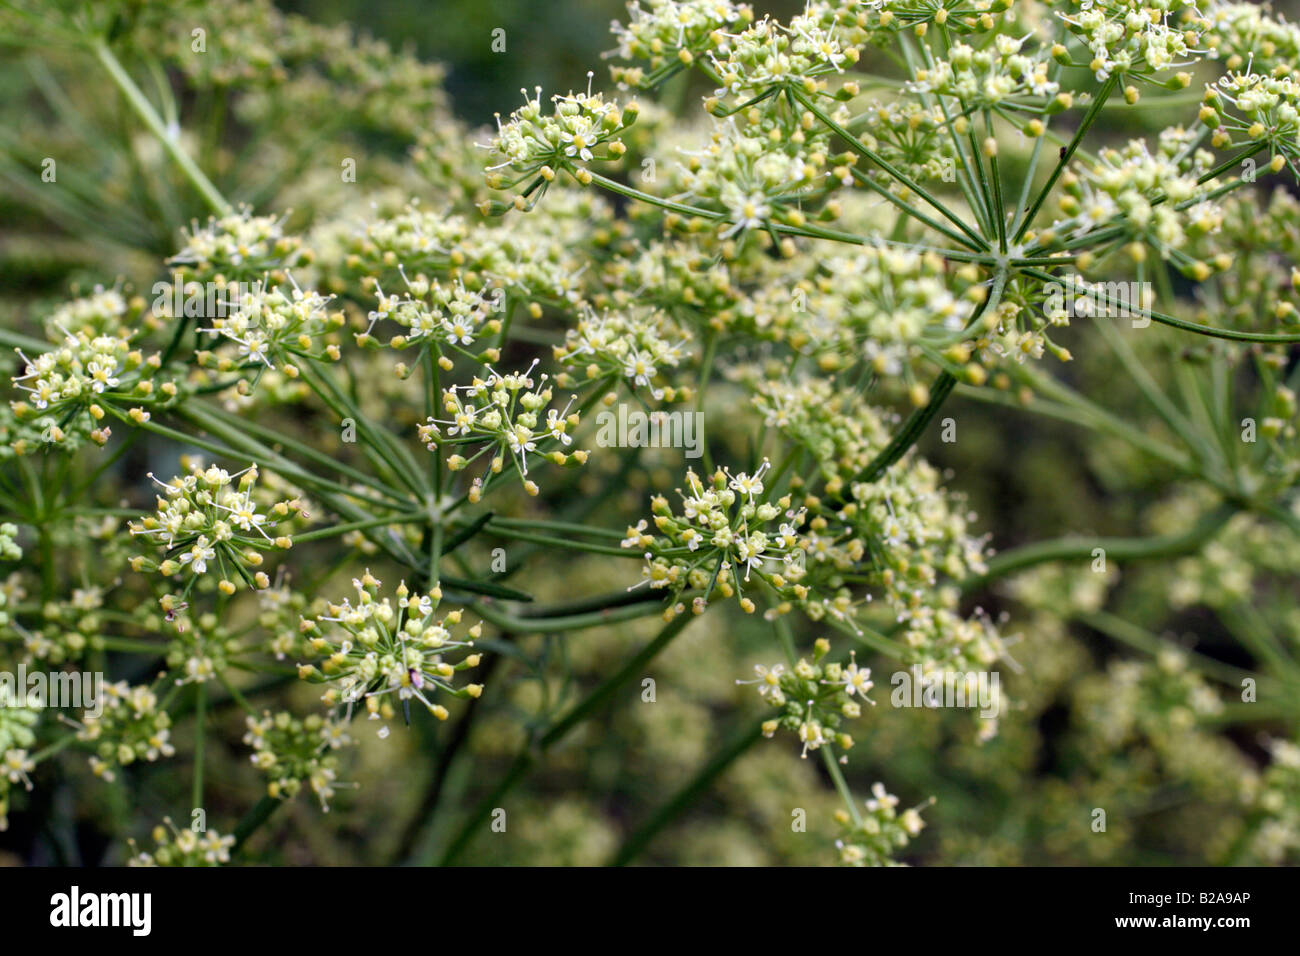 FRENCH LARGE LEAVED PARSLEY ALLOWED TO FLOWER IN ORDER TO COLLECT SEED Stock Photo